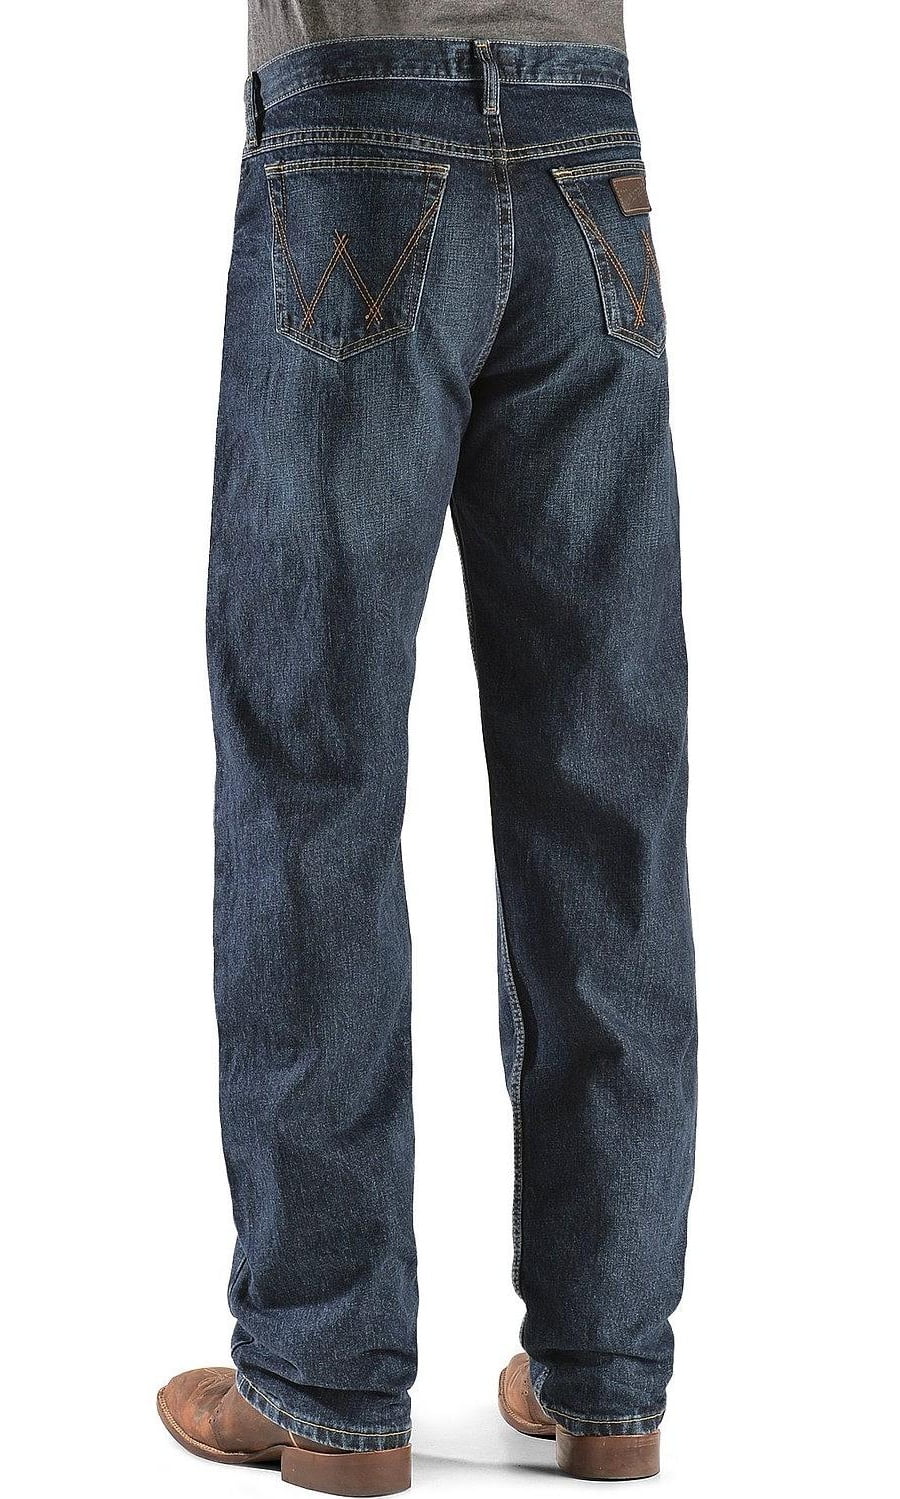 Wrangler - wrangler men's big & tall 20x 01 competition relaxed fit ...